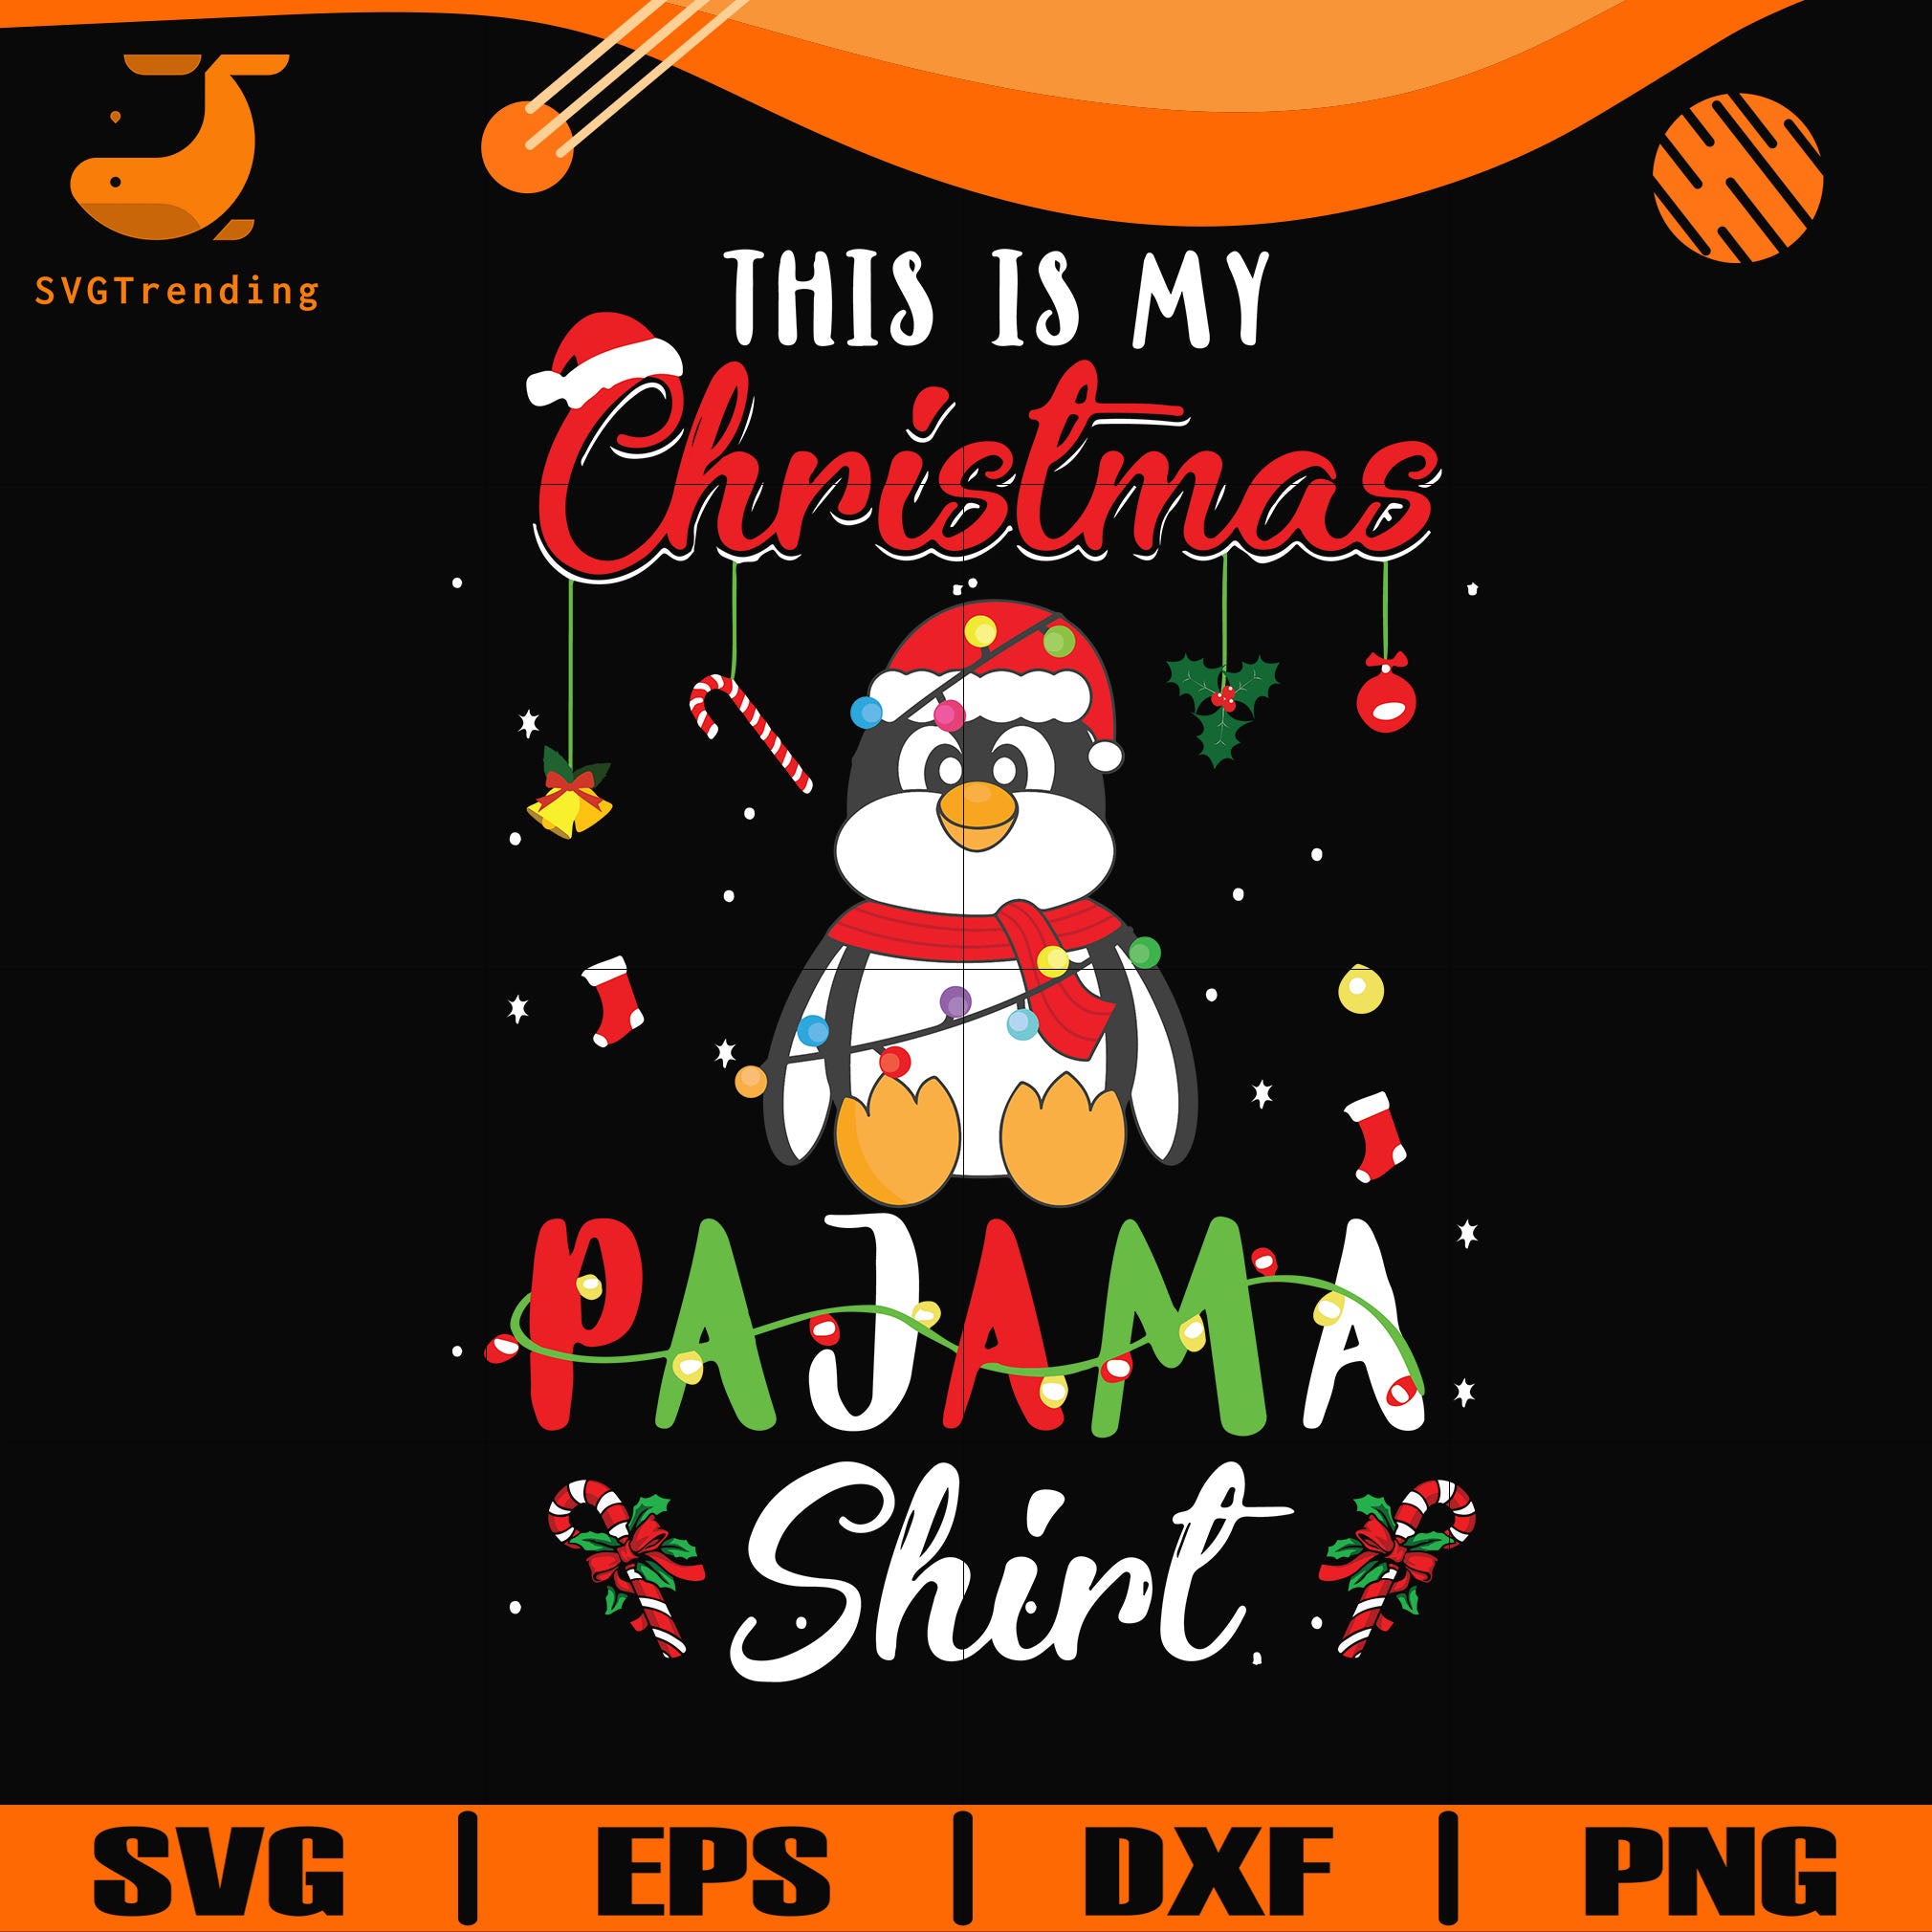 Download This Is My Christmas Pajama Shirt Penguin Svg Png Dxf Eps Digital F Svgtrending